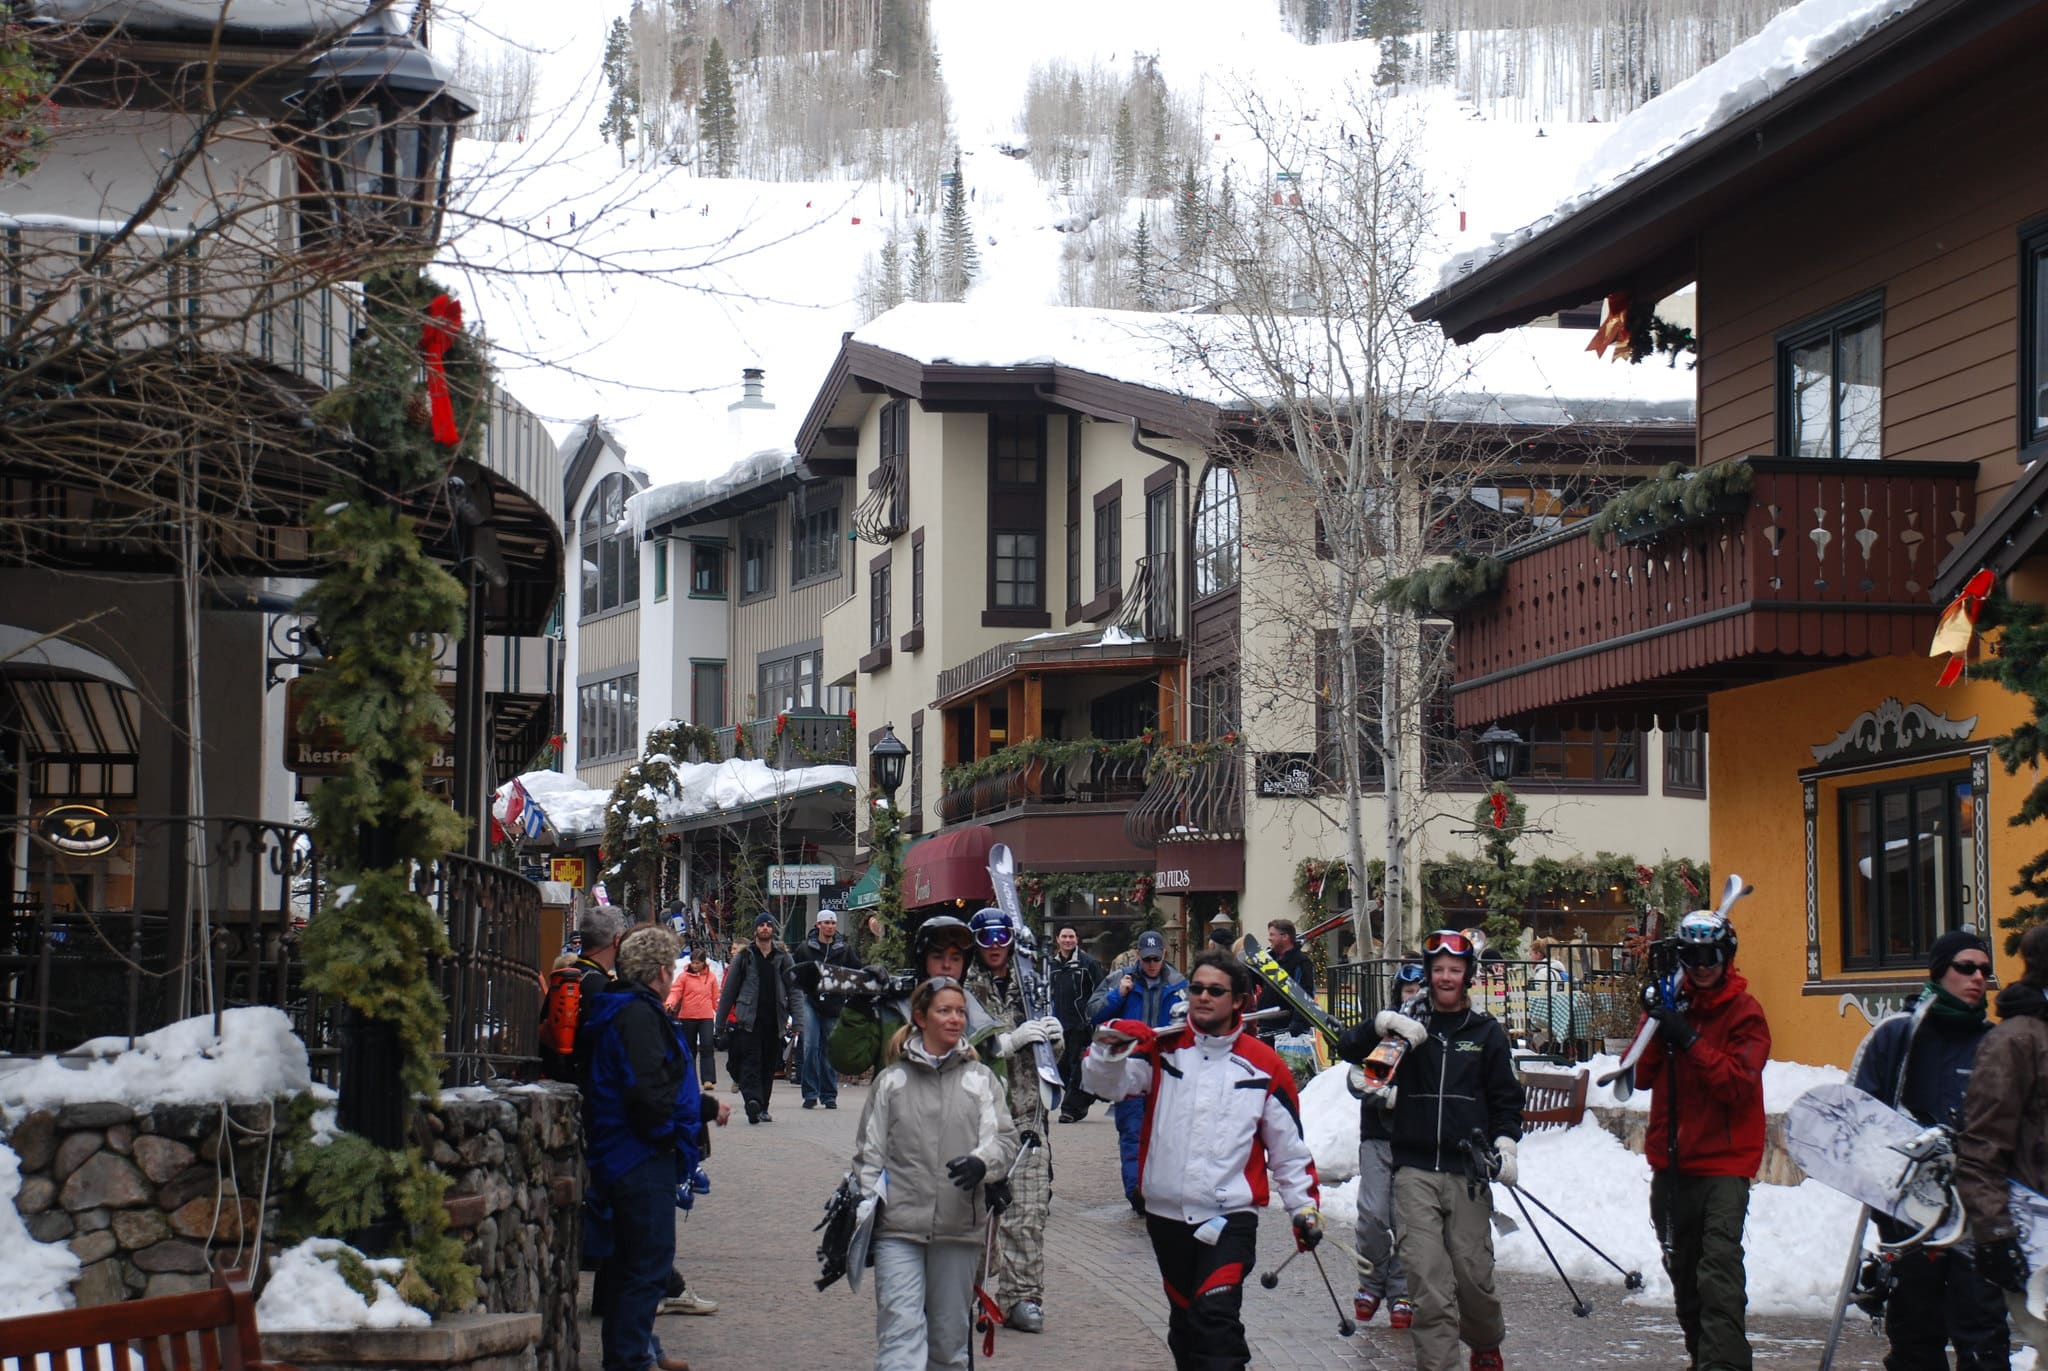 Austrian-inspired buildings lined pedestrian walkway filled with skiiers in Vail